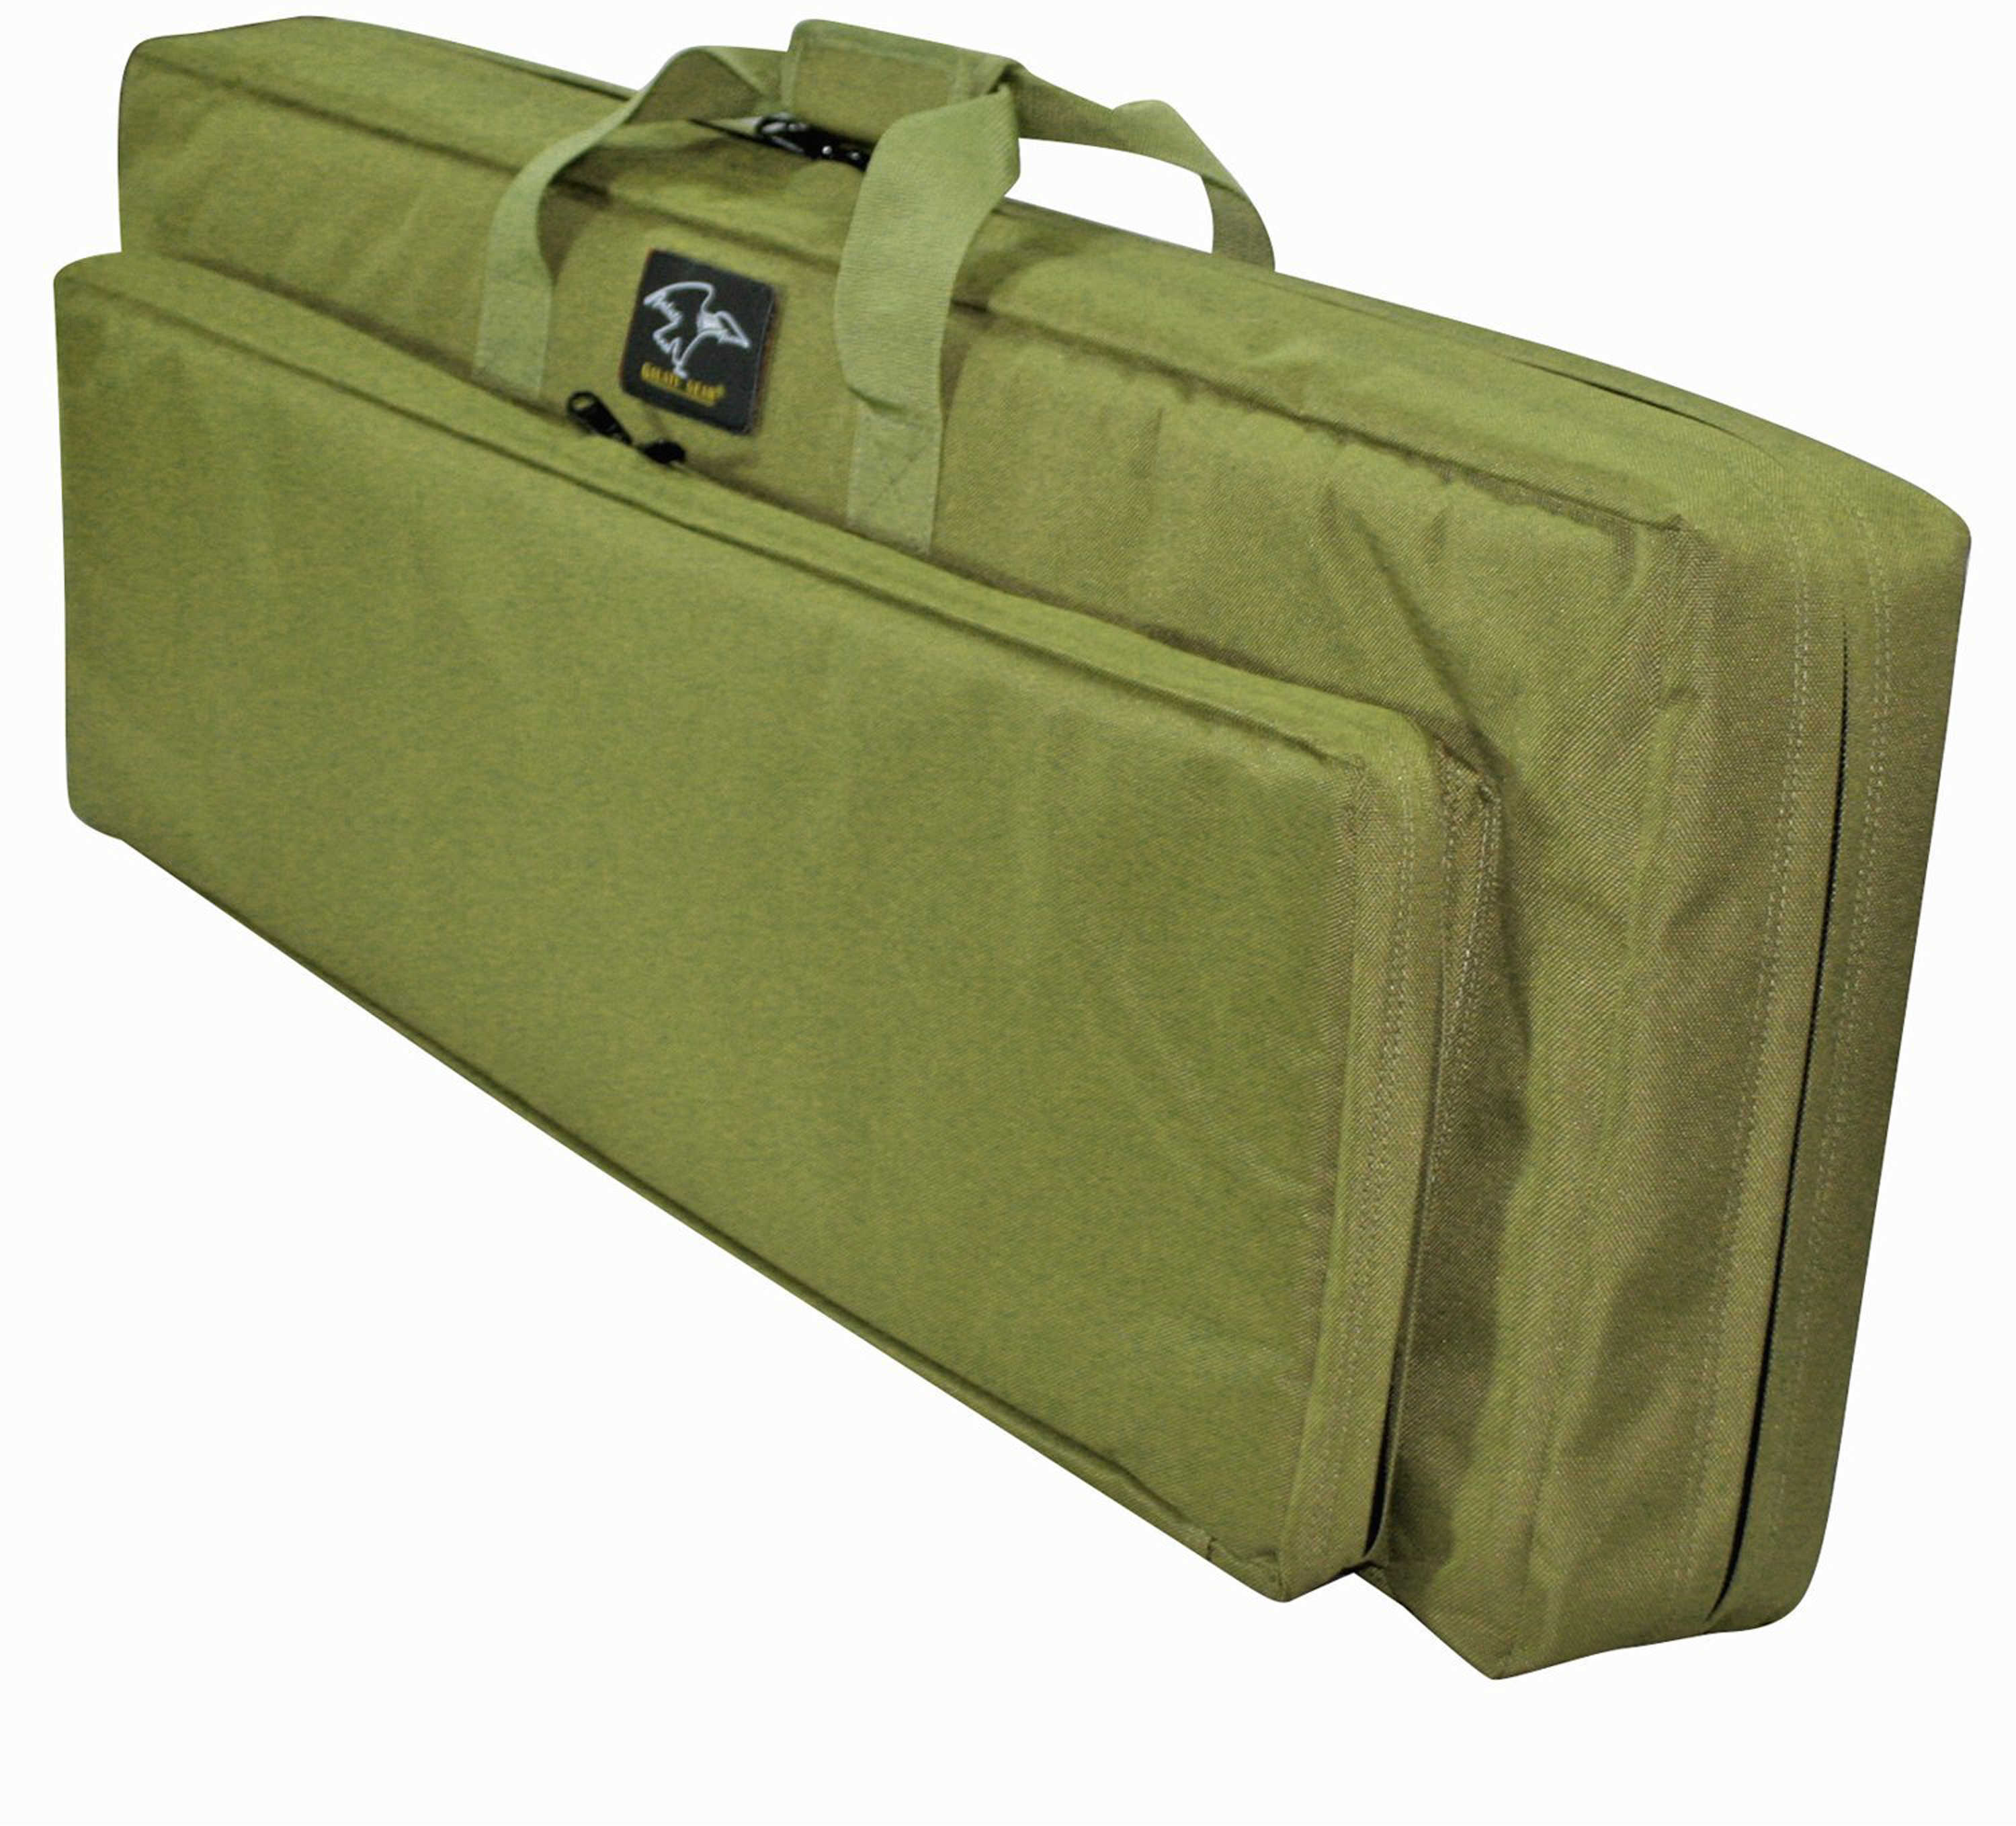 Double Discreet Square Rifle Case - 38", Olive Drab Md: SQ38DOD